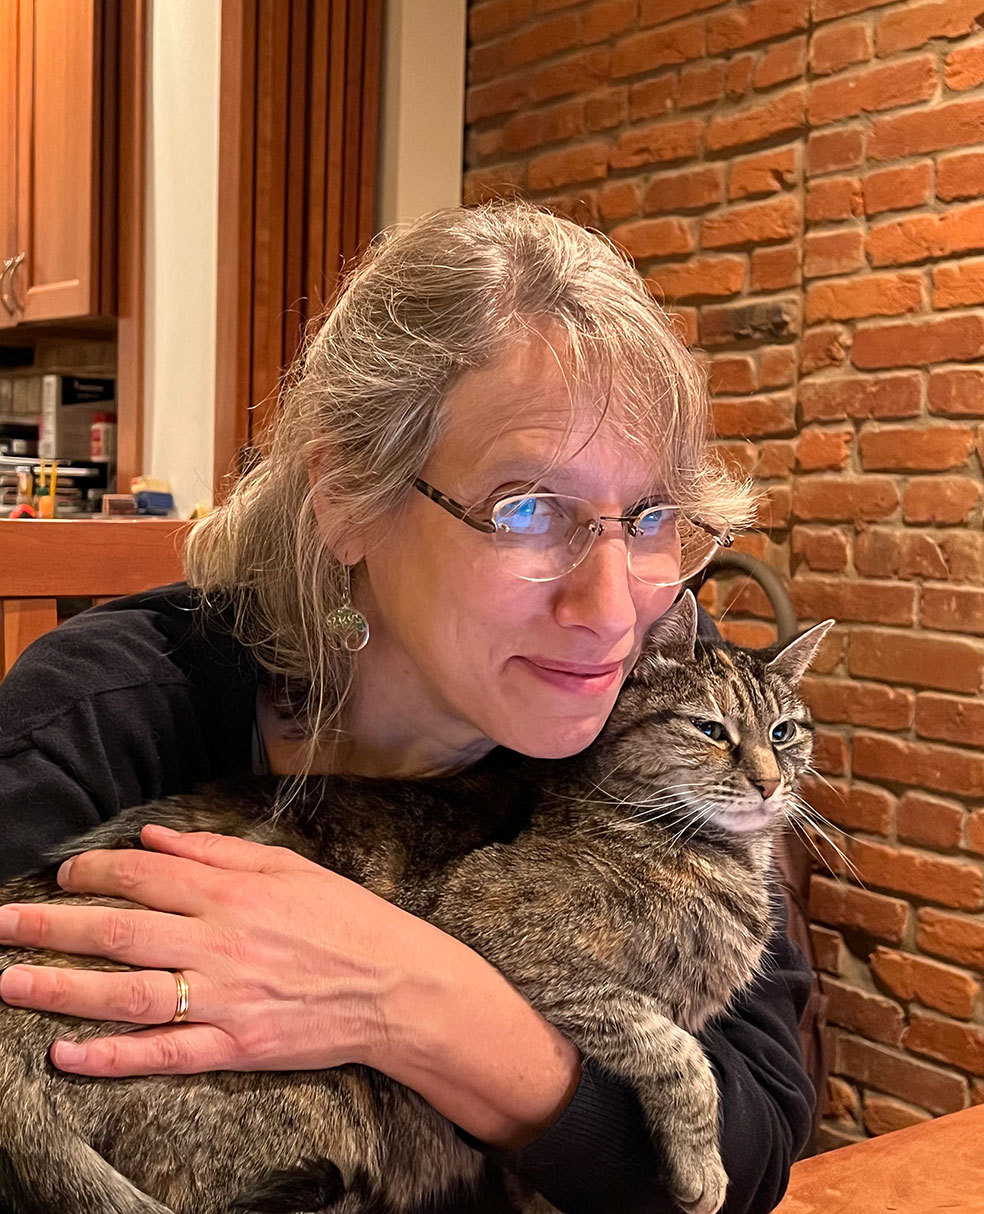 Kate, a white woman with glasses, hugs her cat